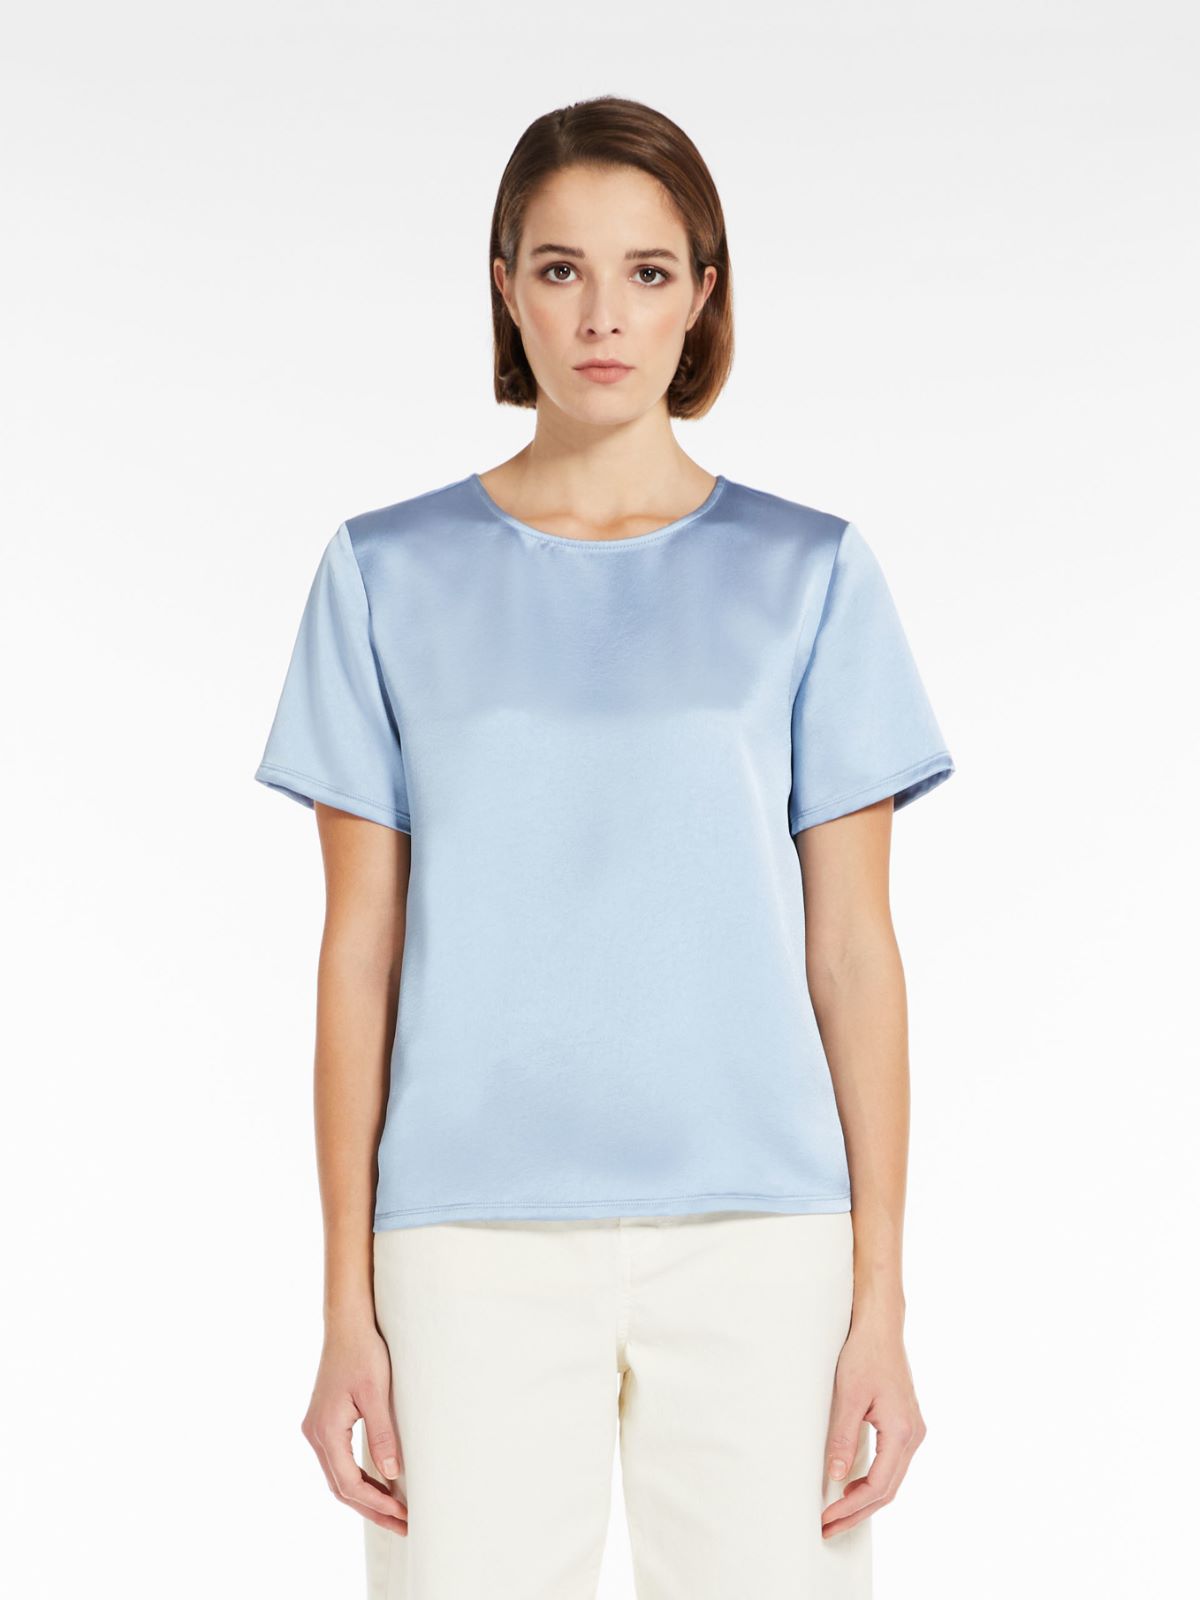 Blouse in satin and jersey - LIGHT BLUE - Weekend Max Mara - 2